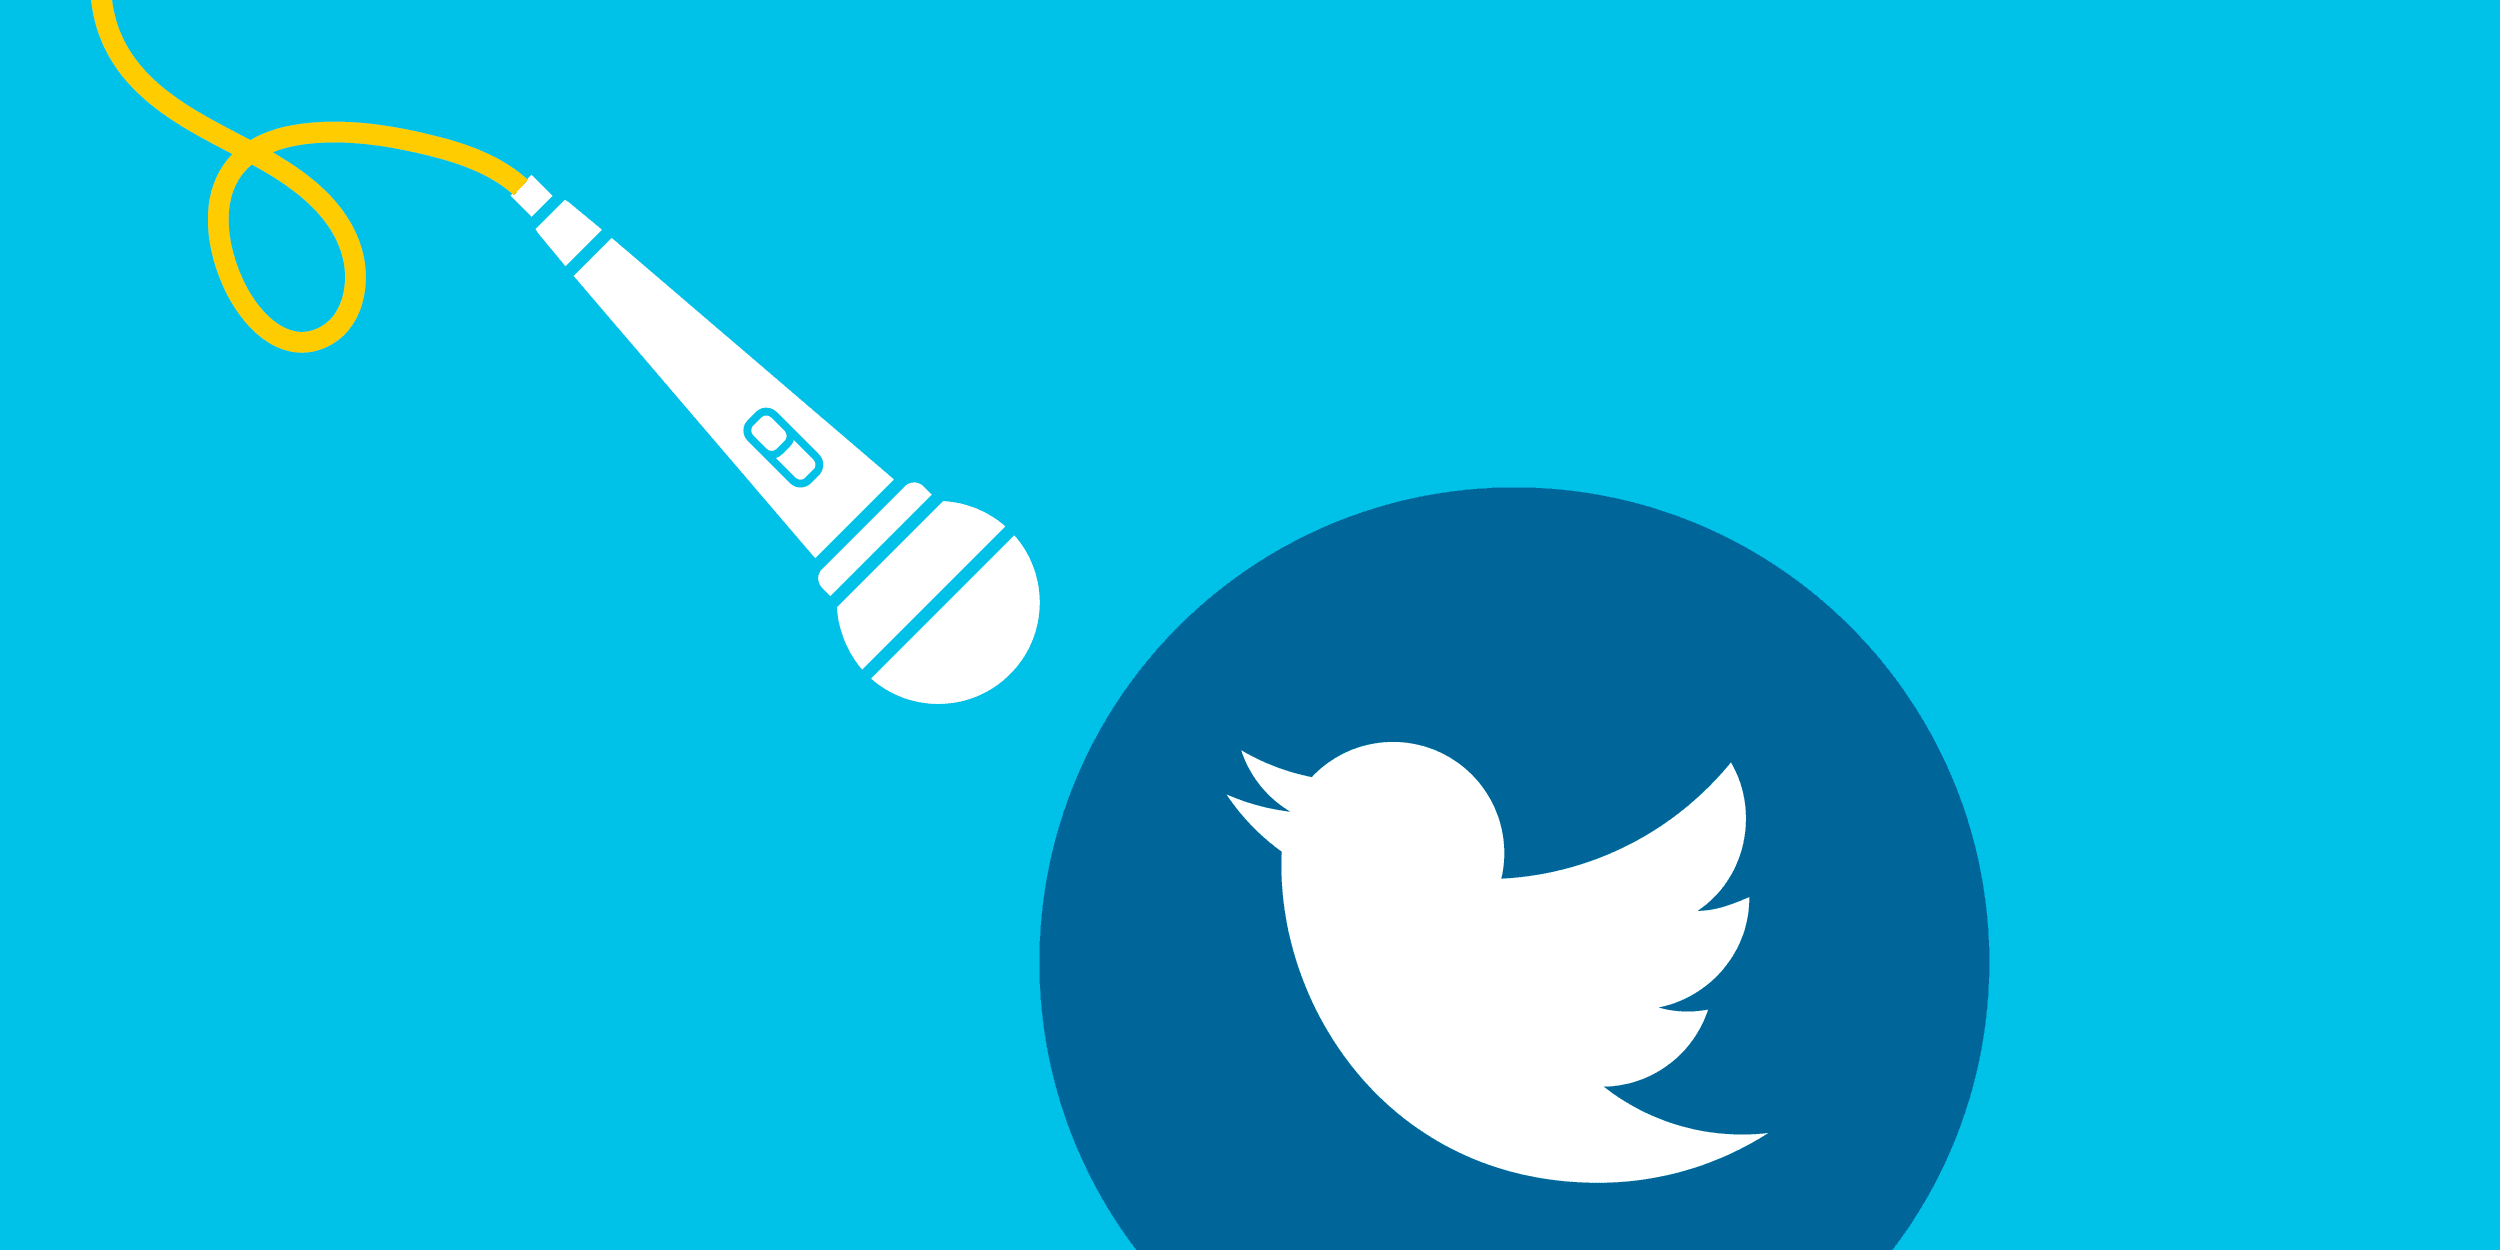 illustration of a bird that looks like a Twitter logo singing into a microphone